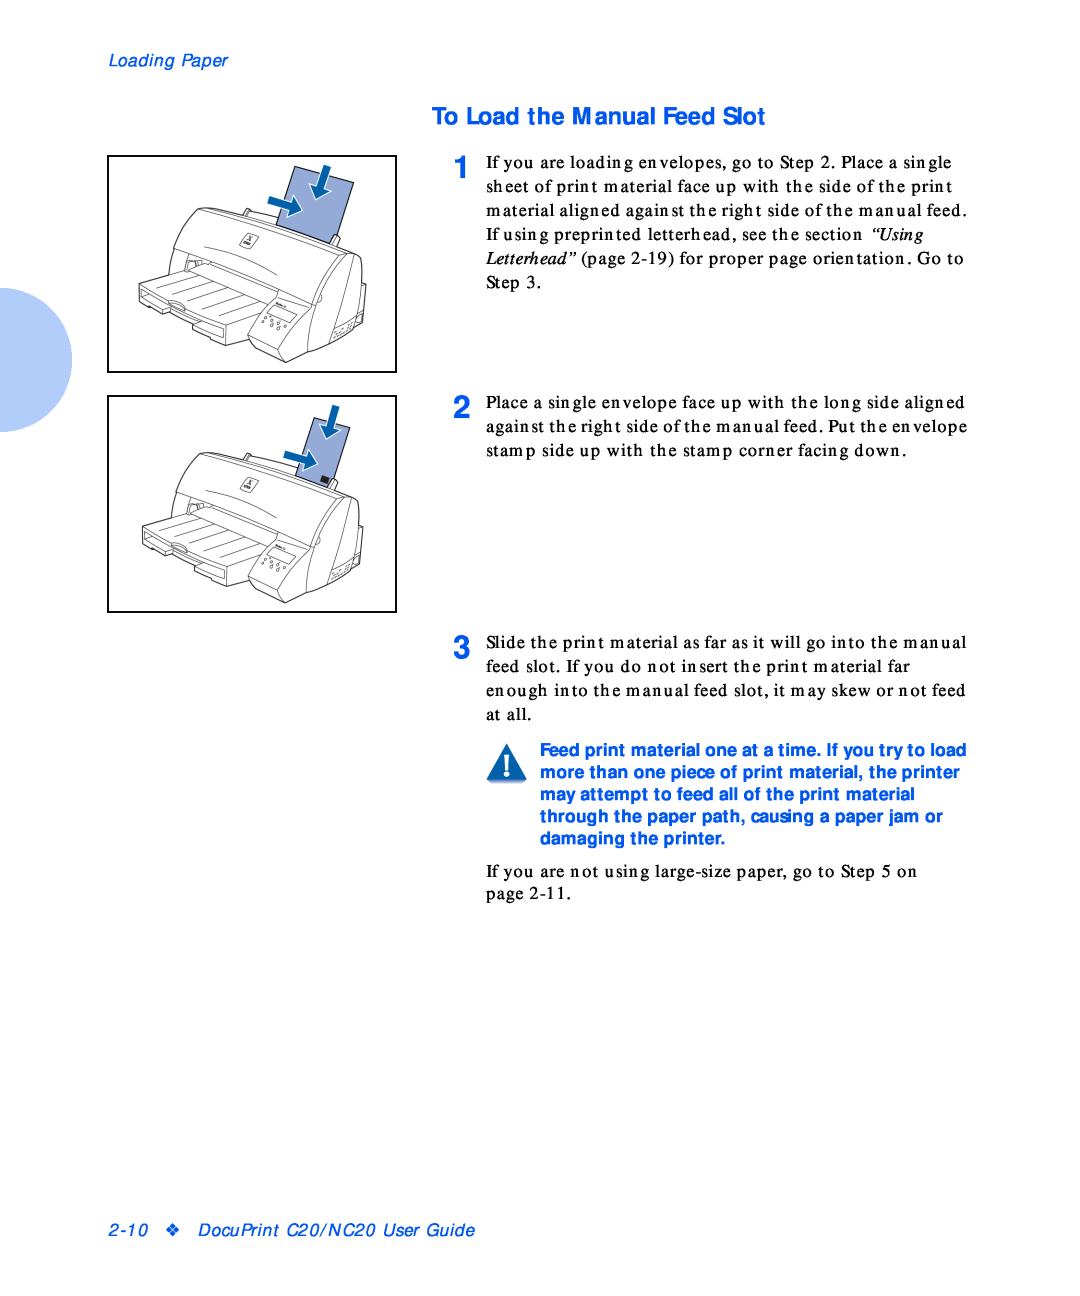 Xerox manual To Load the Manual Feed Slot, Loading Paper, DocuPrint C20/NC20 User Guide 